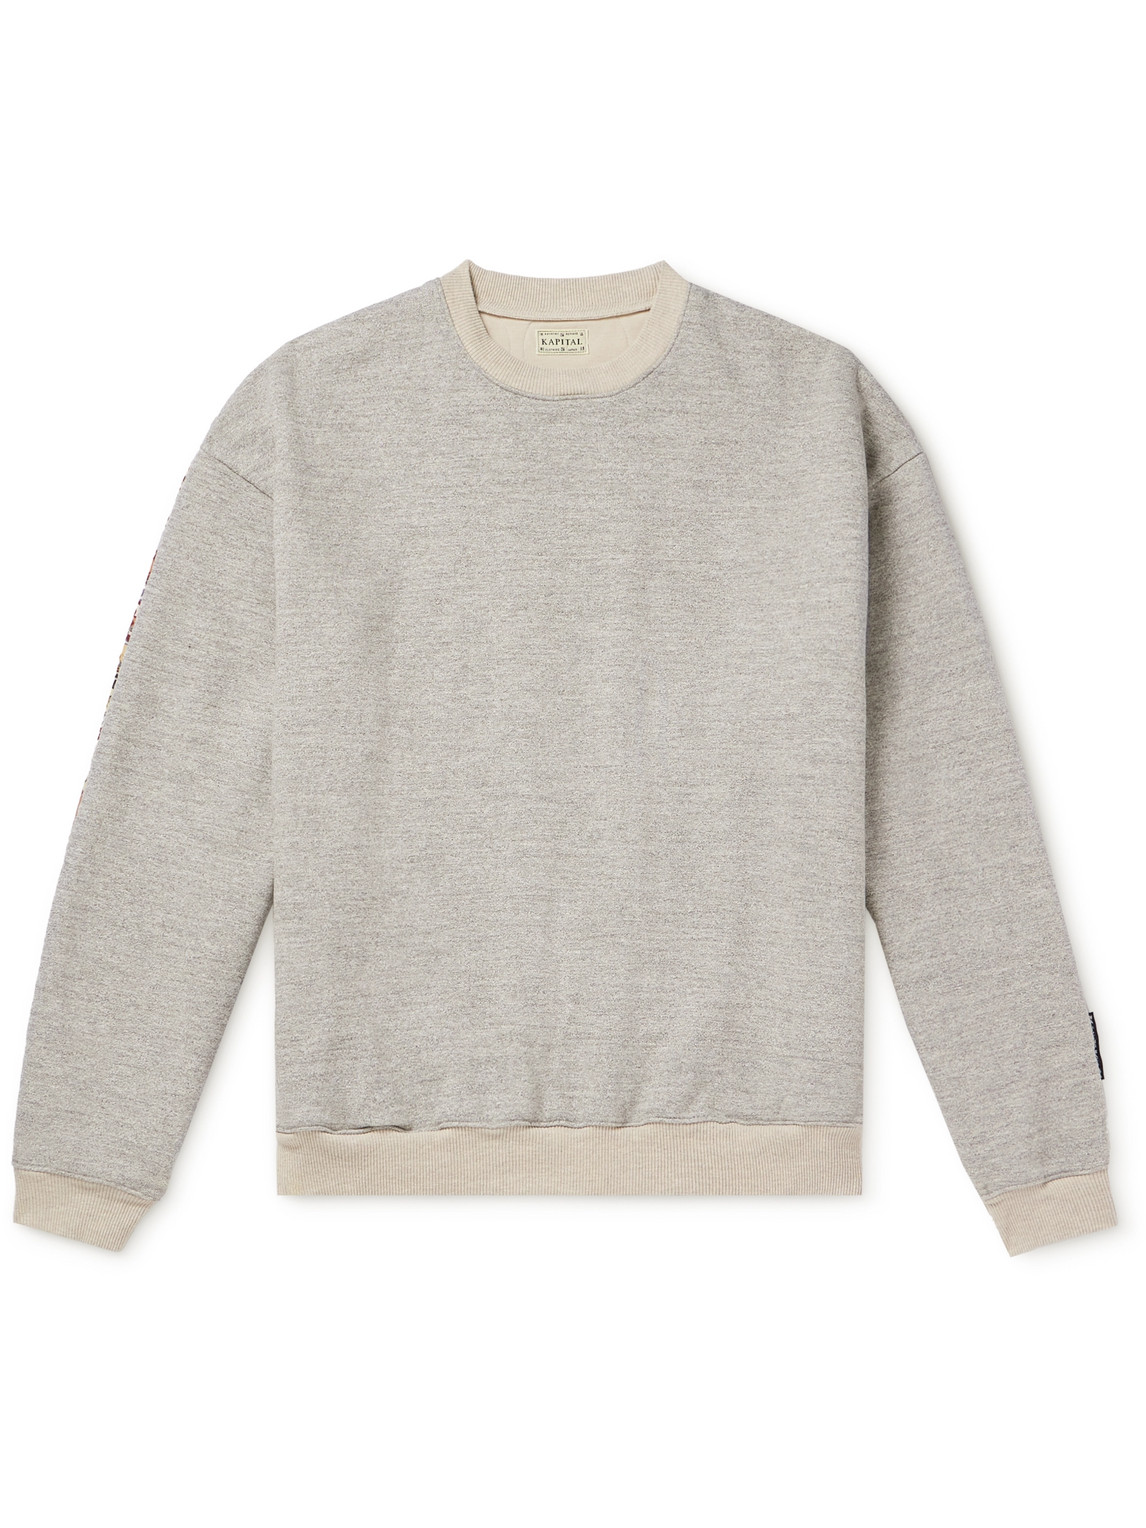 KAPITAL PECKISH MARIA COTTON-JERSEY AND QUILTED SHELL SWEATSHIRT